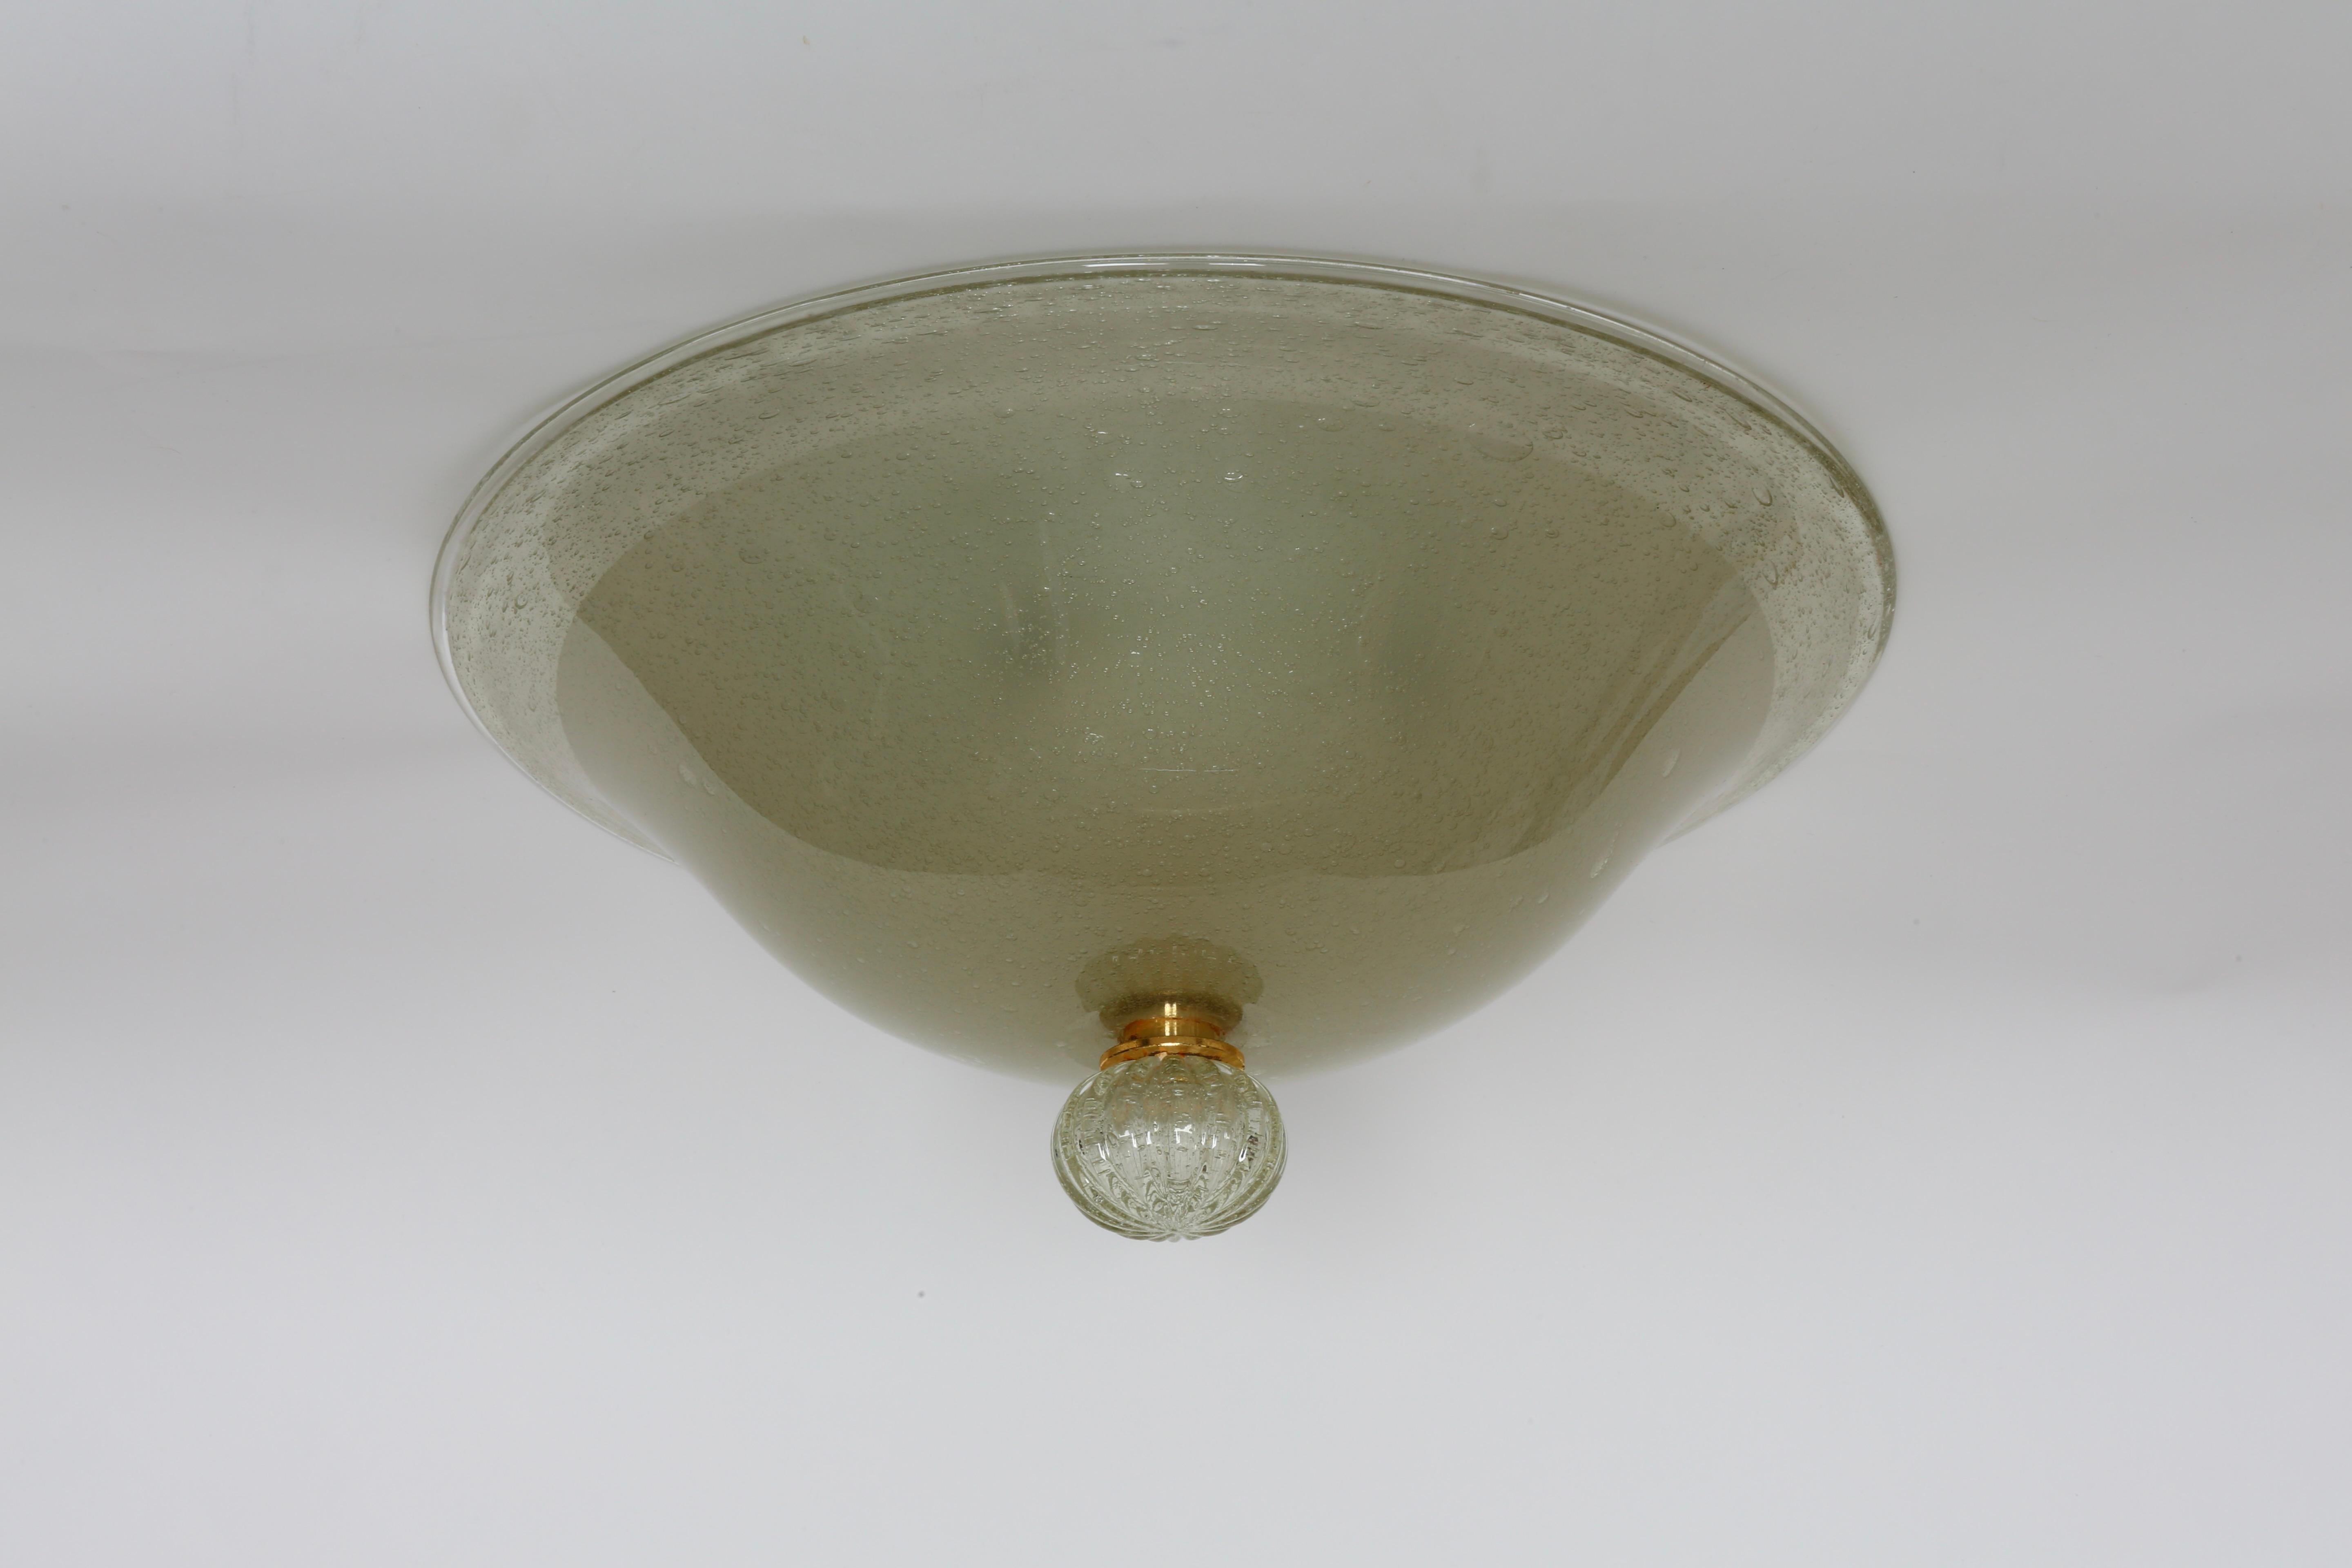 Murano Flush Mount Ceiling Light by Barovier & Toso, large For Sale 4